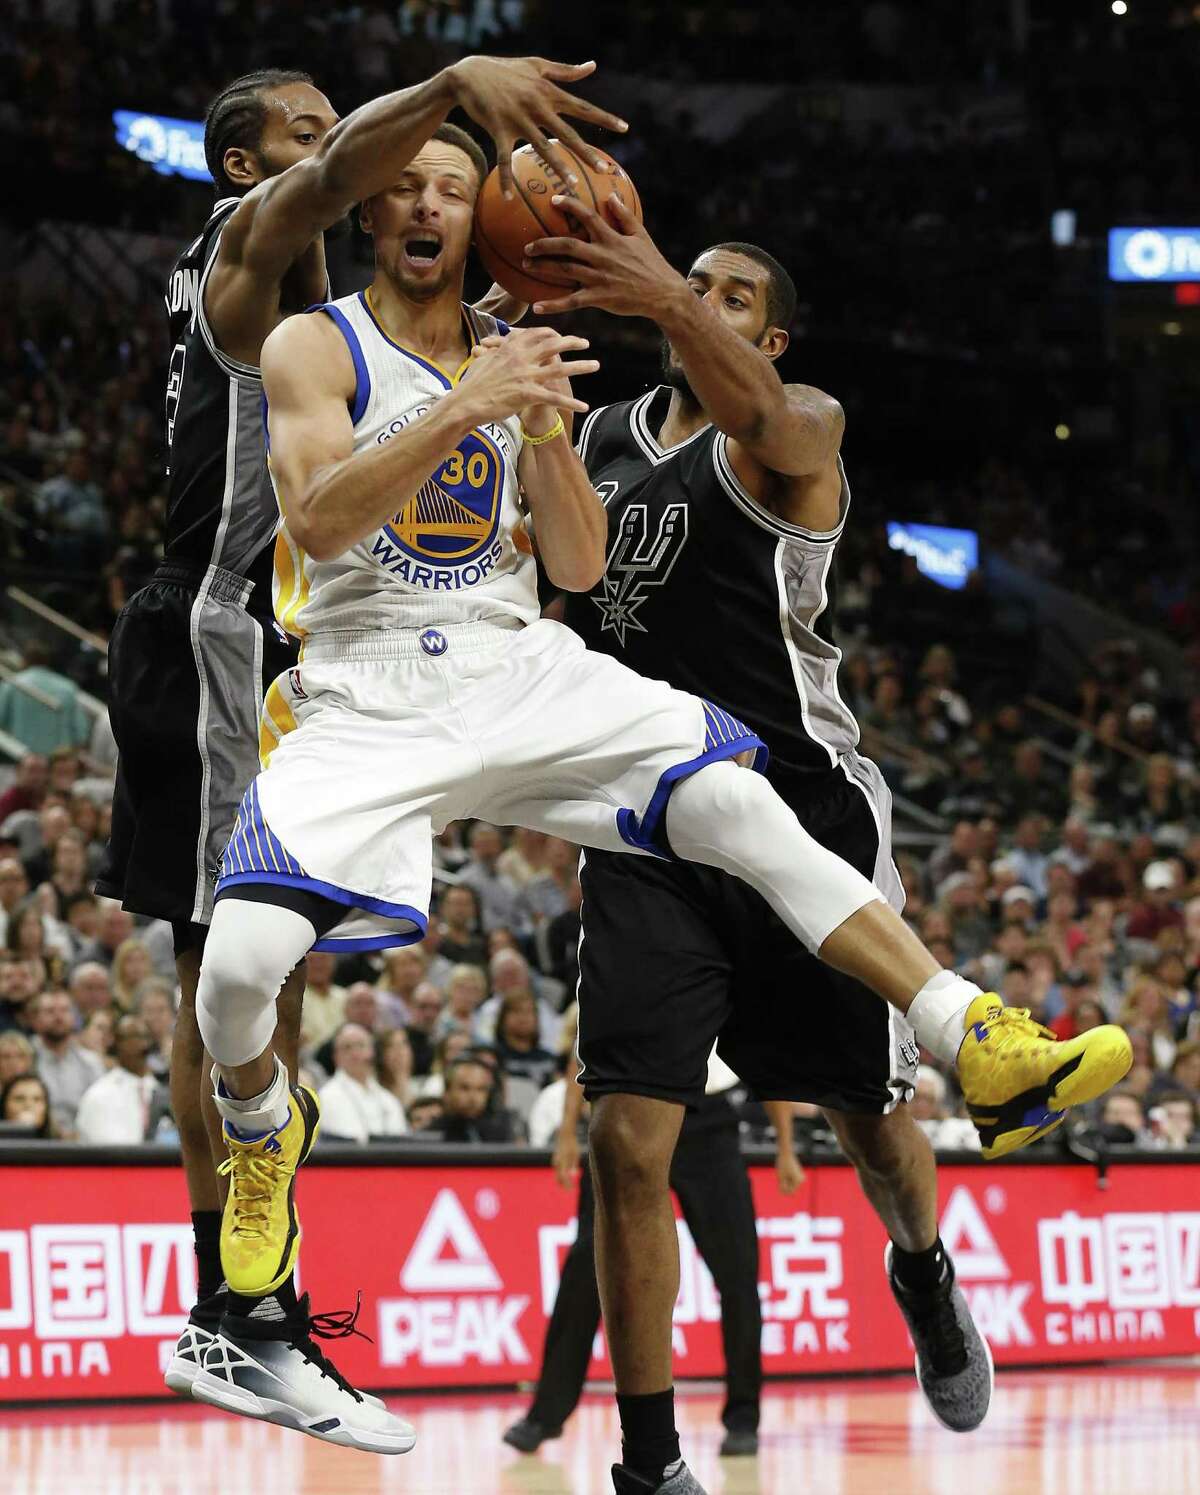 Spurs' Kawhi Leonard (02) and LaMarcus Aldridge (12) defend against Golden State Warriors' Stephen Curry (30) at the AT&T Center on Sunday, Apr. 10, 2016. The Warriors defeated the Spurs, 92-86. The Warriors with the victory also tied the 1995-96 Chicago Bulls for most wins in an NBA season with 72 victories. (Kin Man Hui/San Antonio Express-News)